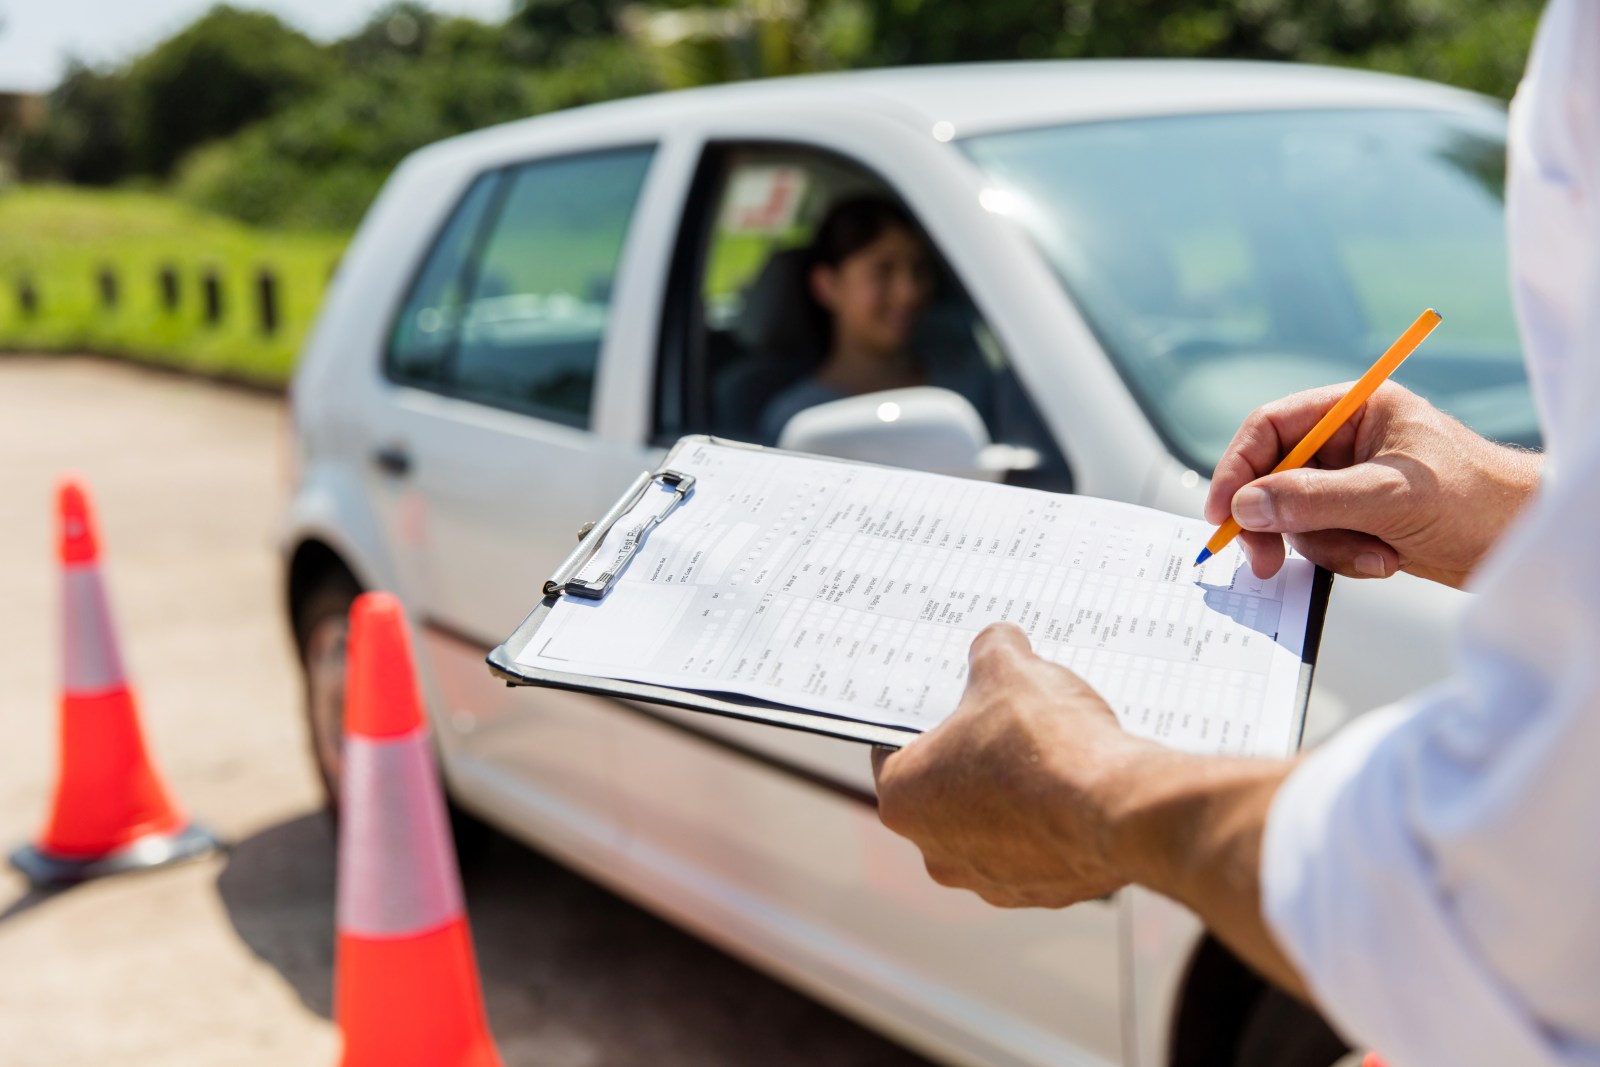 How a Driving School Reduces Anxiety If You're A Nervous Driver